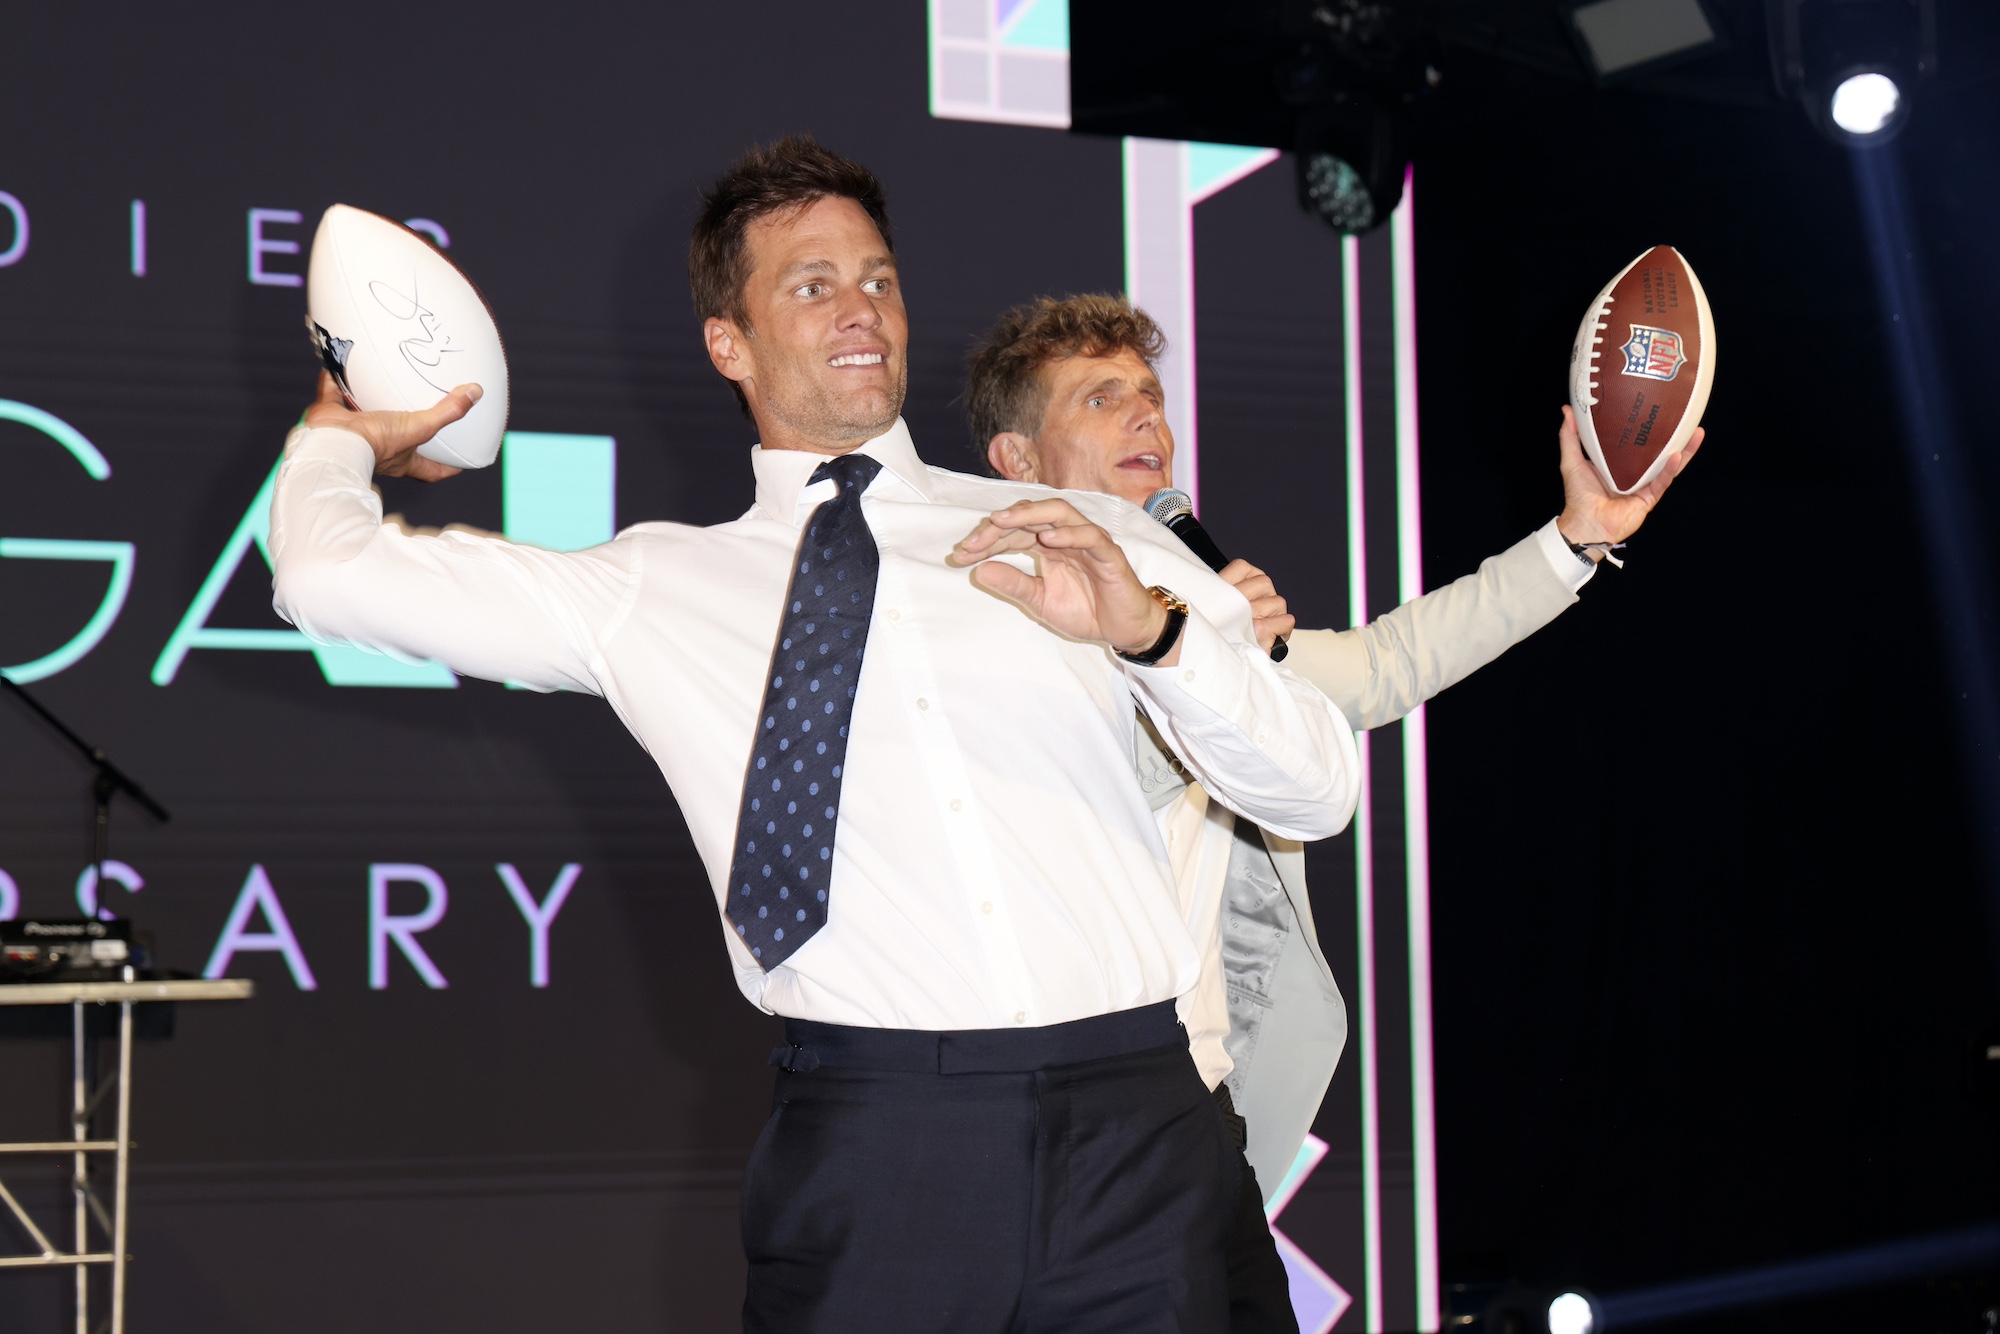 MIAMI, FLORIDA - NOVEMBER 17: Global Ambassador Tom Brady and Founder and CEO of Best Buddies International, Anthony K. Shriver are seen on stage at the 25th Annual Best Buddies Miami Gala at Ice Palace Film Studios on November 17, 2023 in Miami, Florida. (Photo by Alexander Tamargo/Getty Images for Best Buddies)